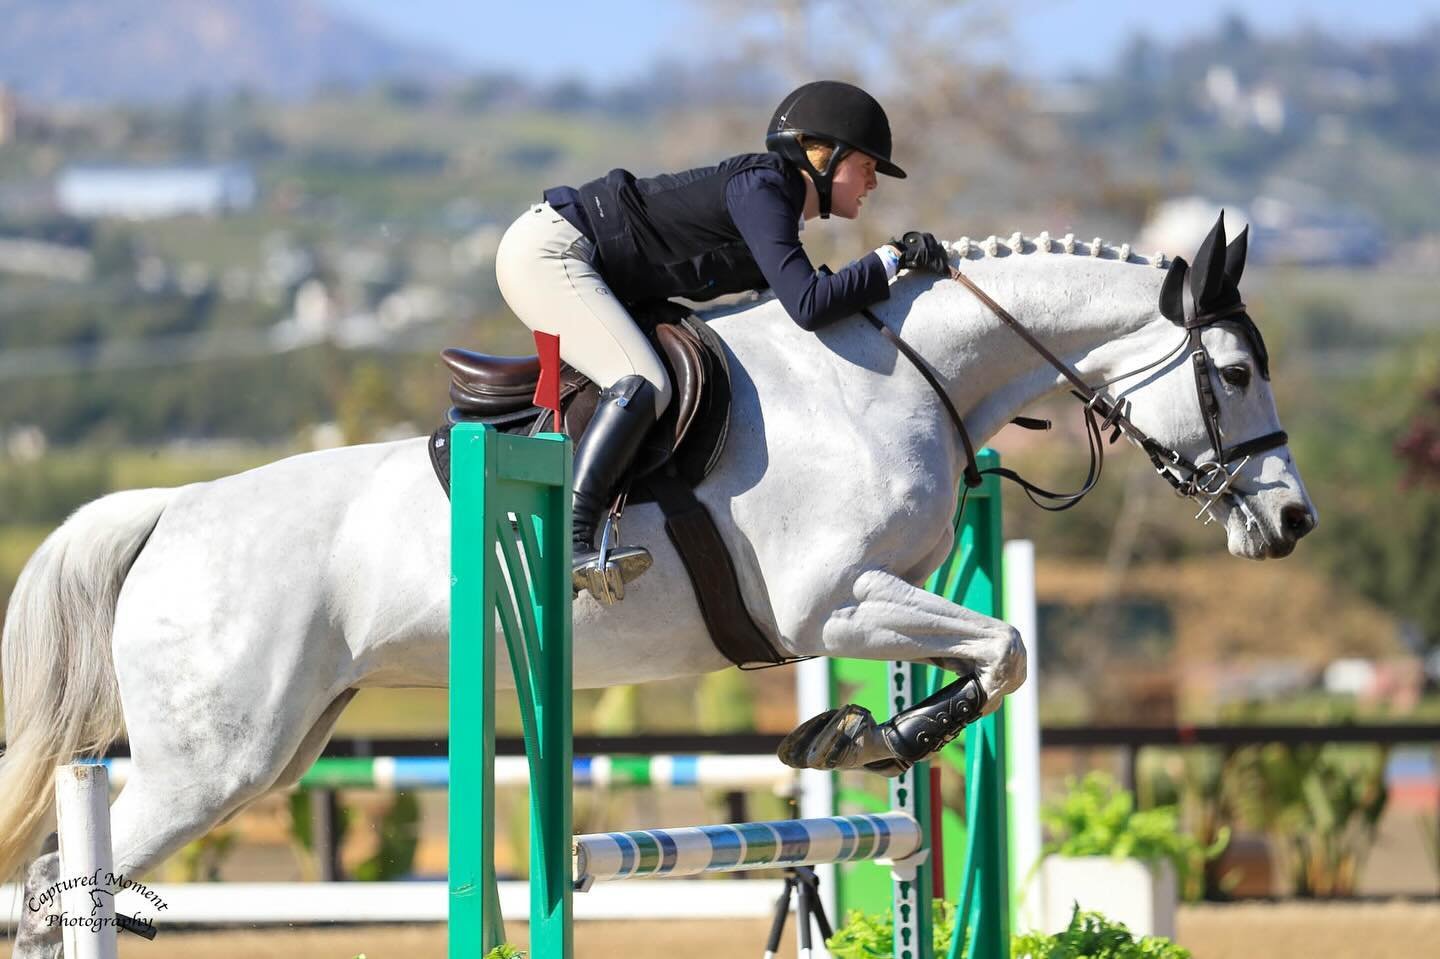 So proud of Leila Hart and her horse Aida De Bel Air last week! These two put in some great rounds in the .90 and 1.0 Jumpers, placing 5th and 7th in competitive classes!🏅👏🏻

#Sunnybrook #SB #JumpNEE #Jumpers #Hunters #Eq #Ponies